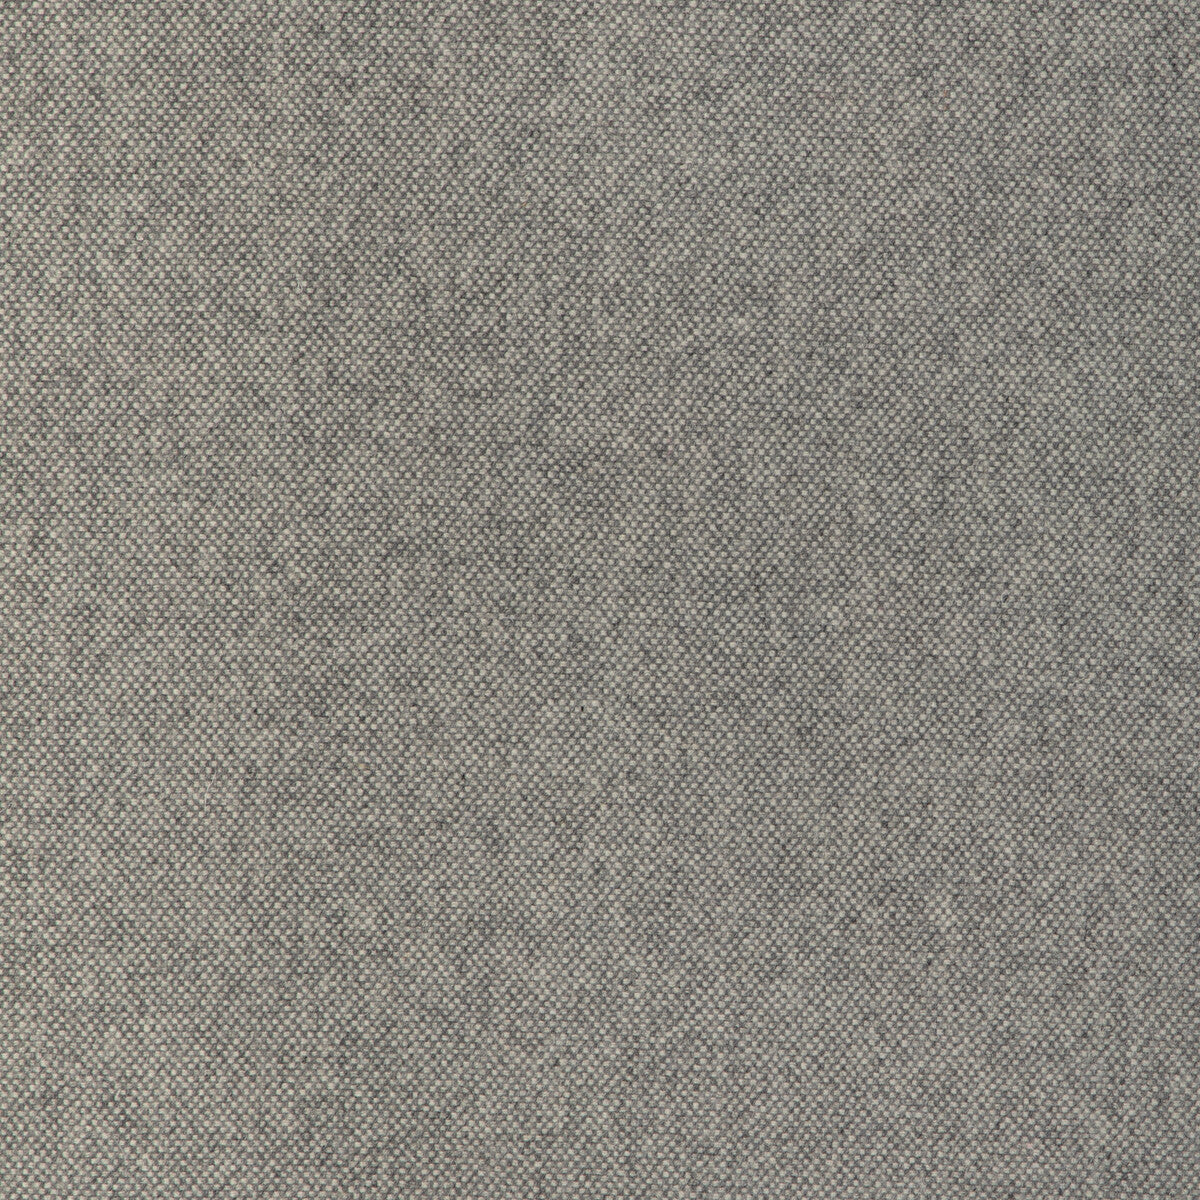 Manchester Wool fabric in fog color - pattern 37026.1161.0 - by Kravet Contract